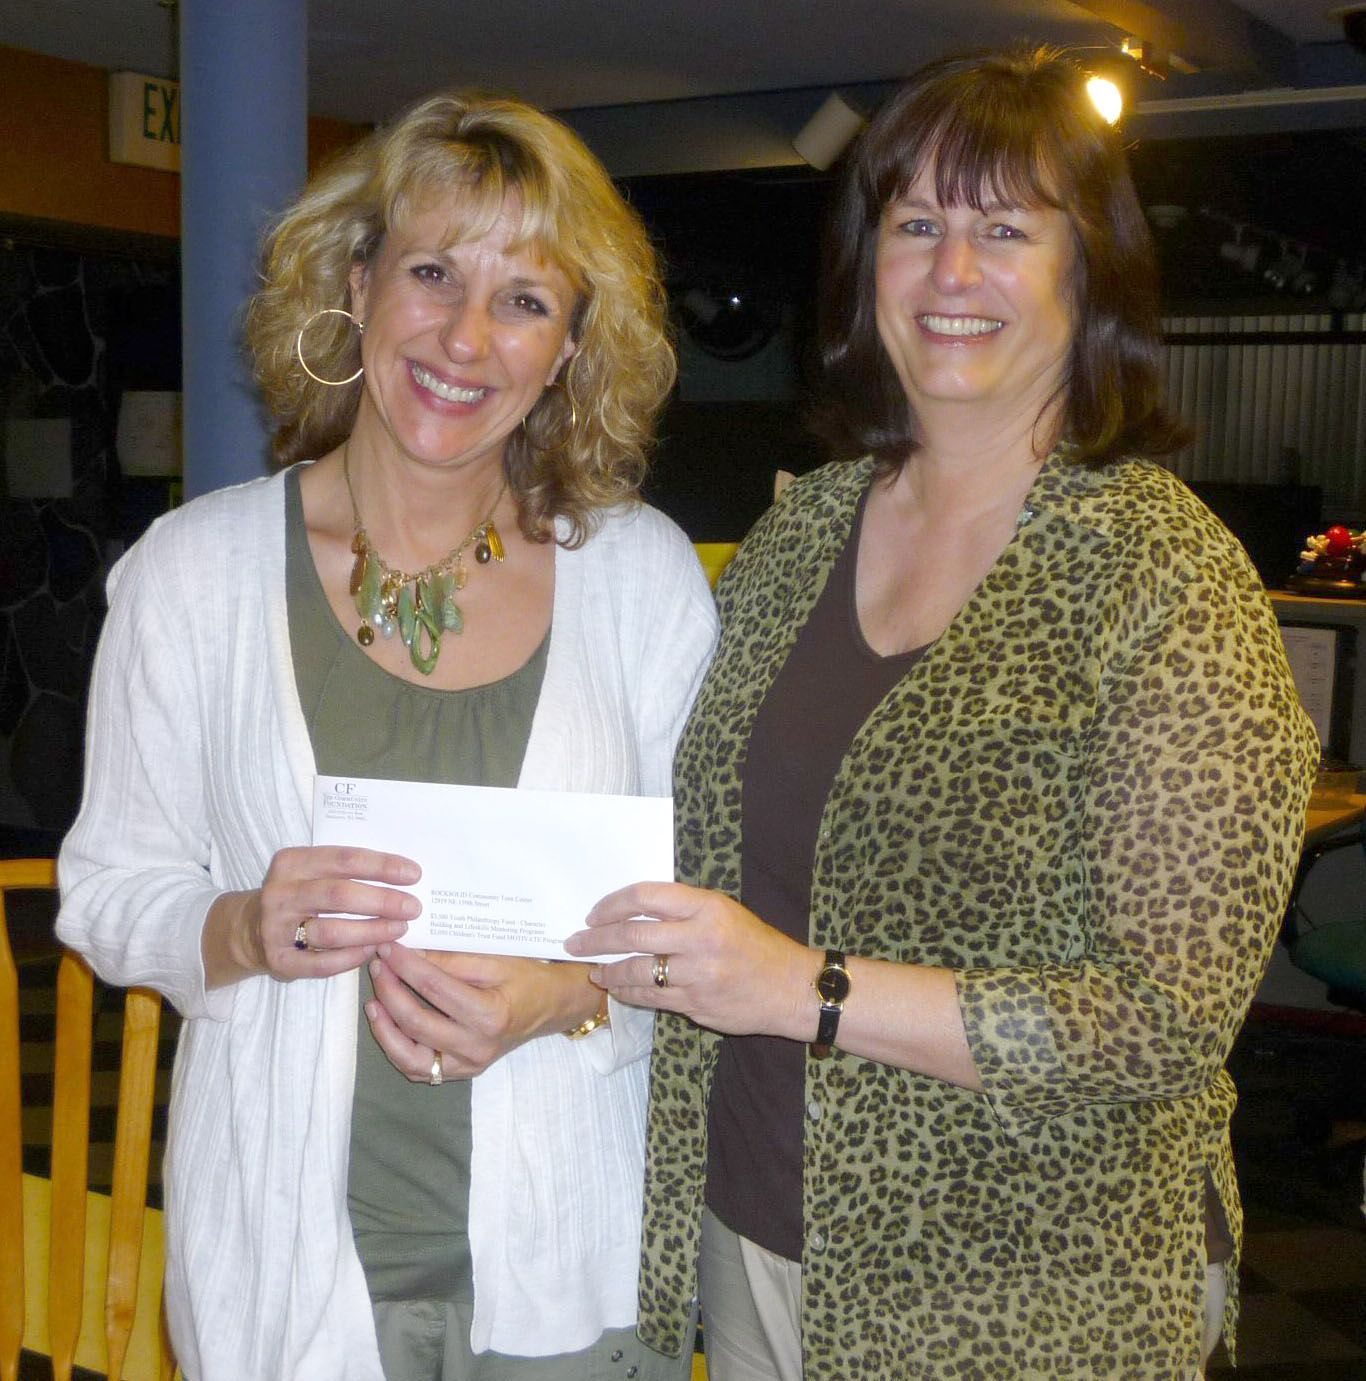 Nancy Miller, left, executive director of the Rocksolid Teen Center, accepts grant money from Anne Digenis, grants officer at The Community Foundation.